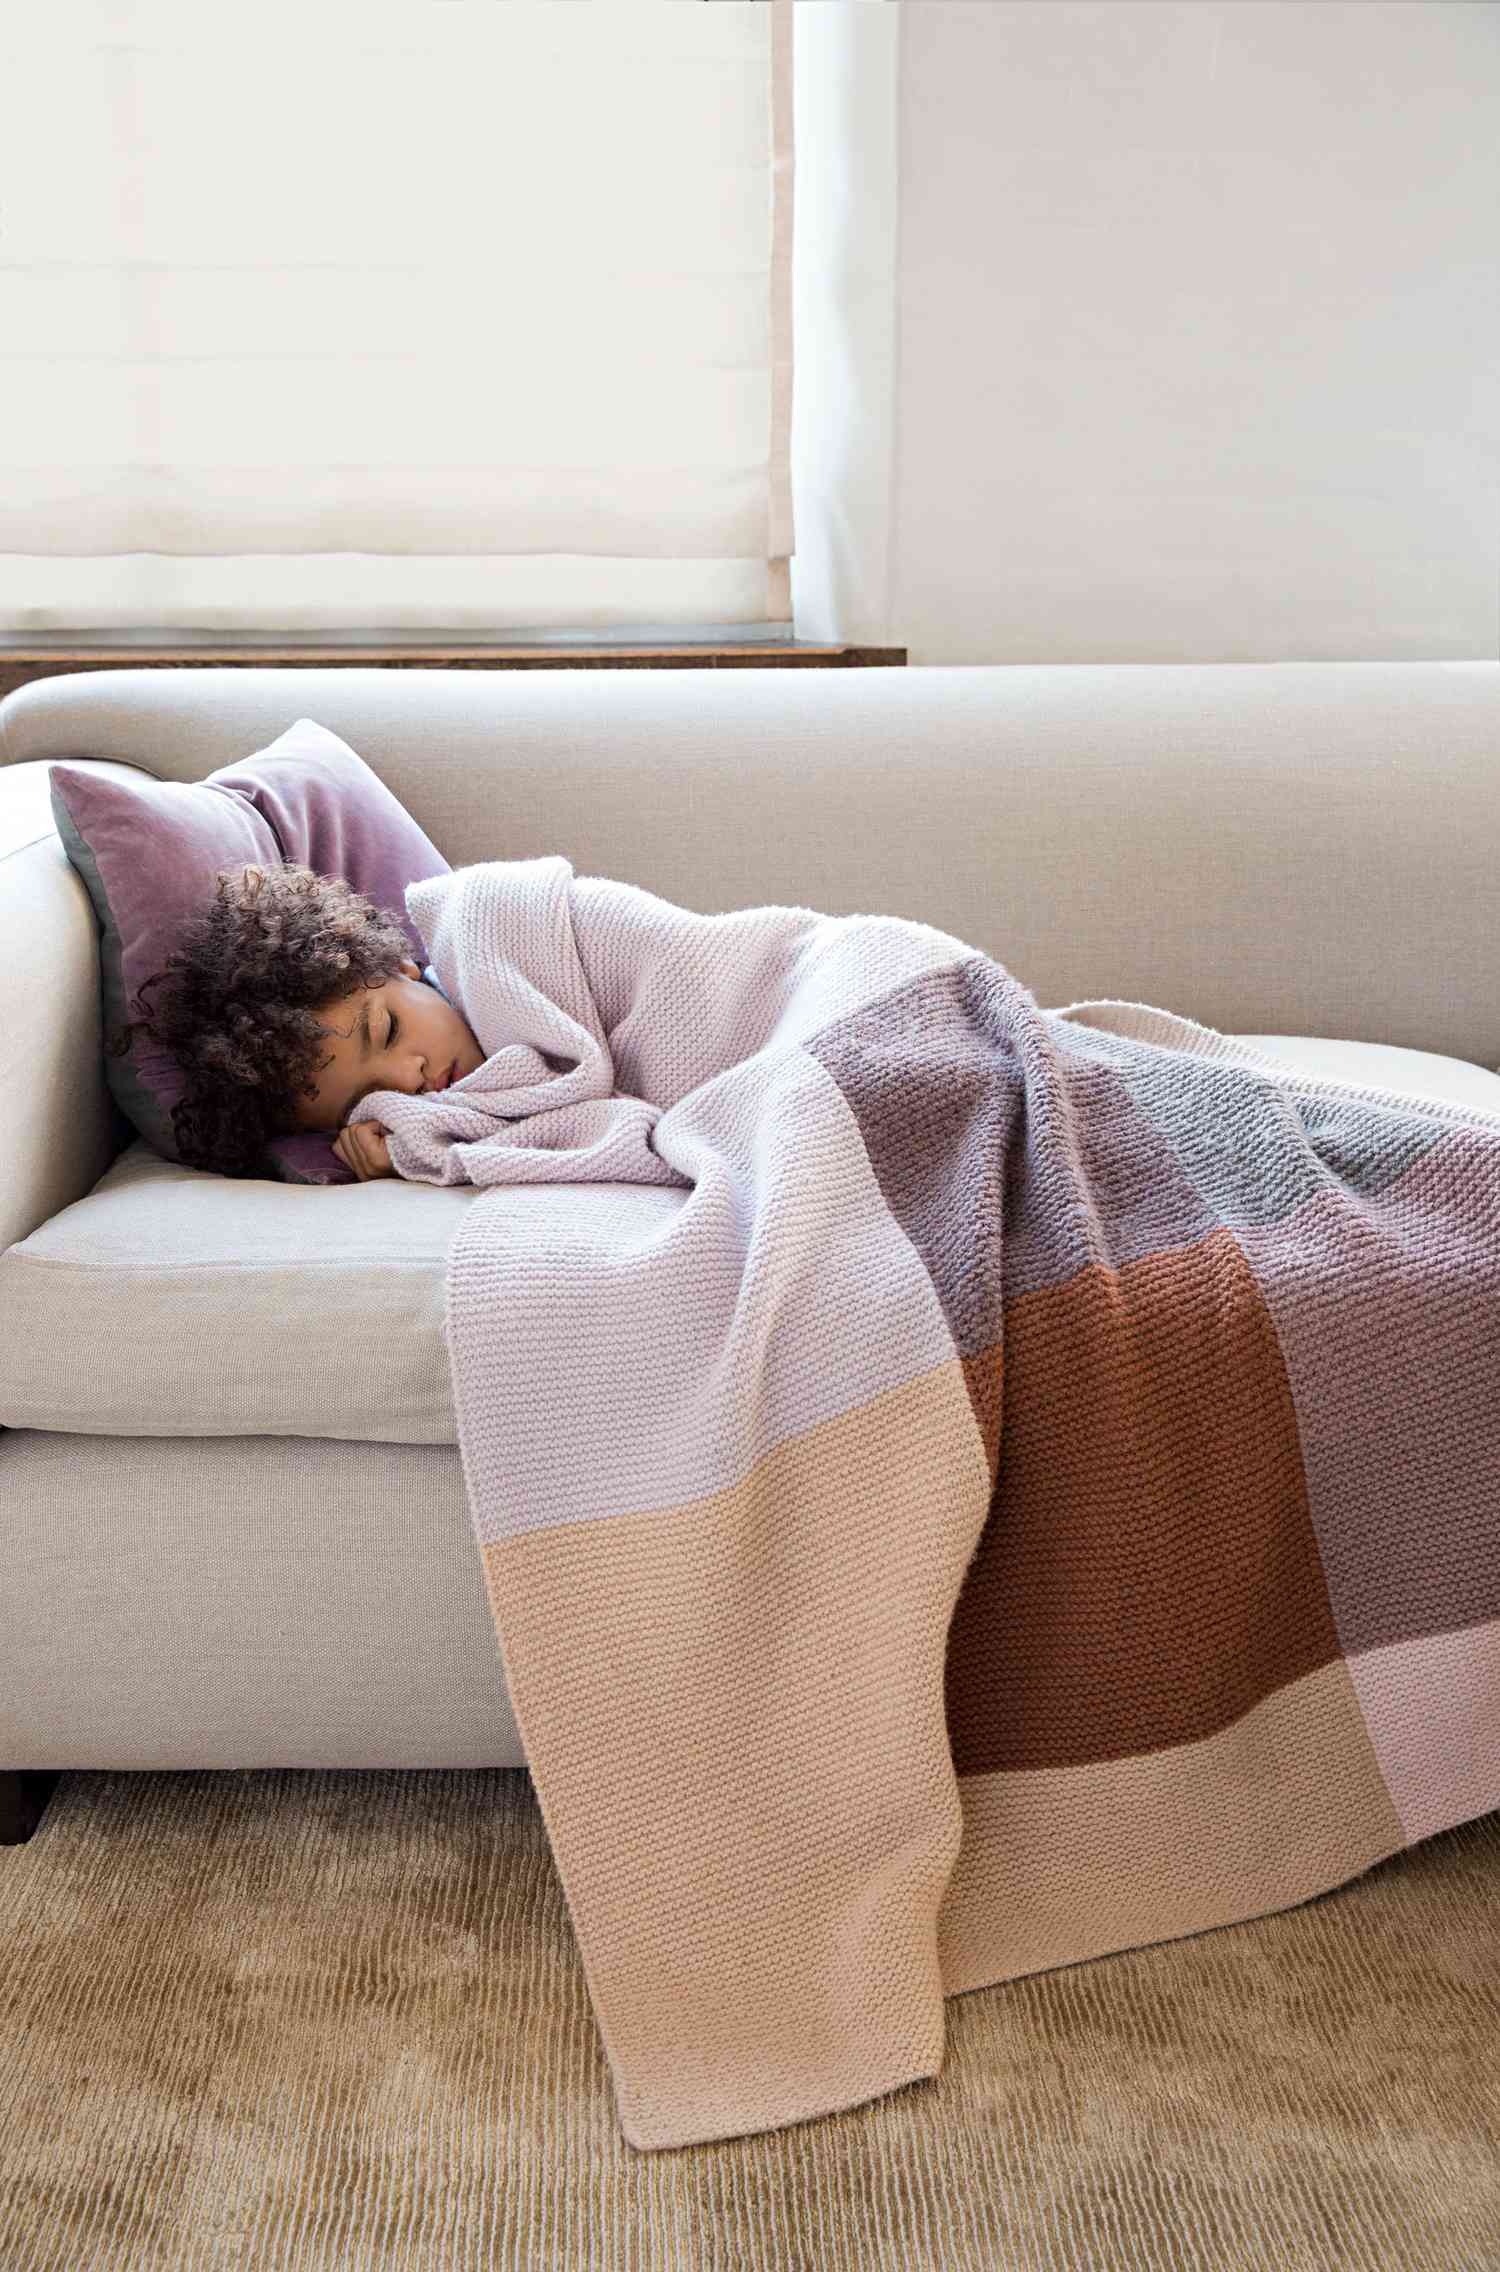 knit-color-blocked-blanket-kid-sleeping-couch-103208696